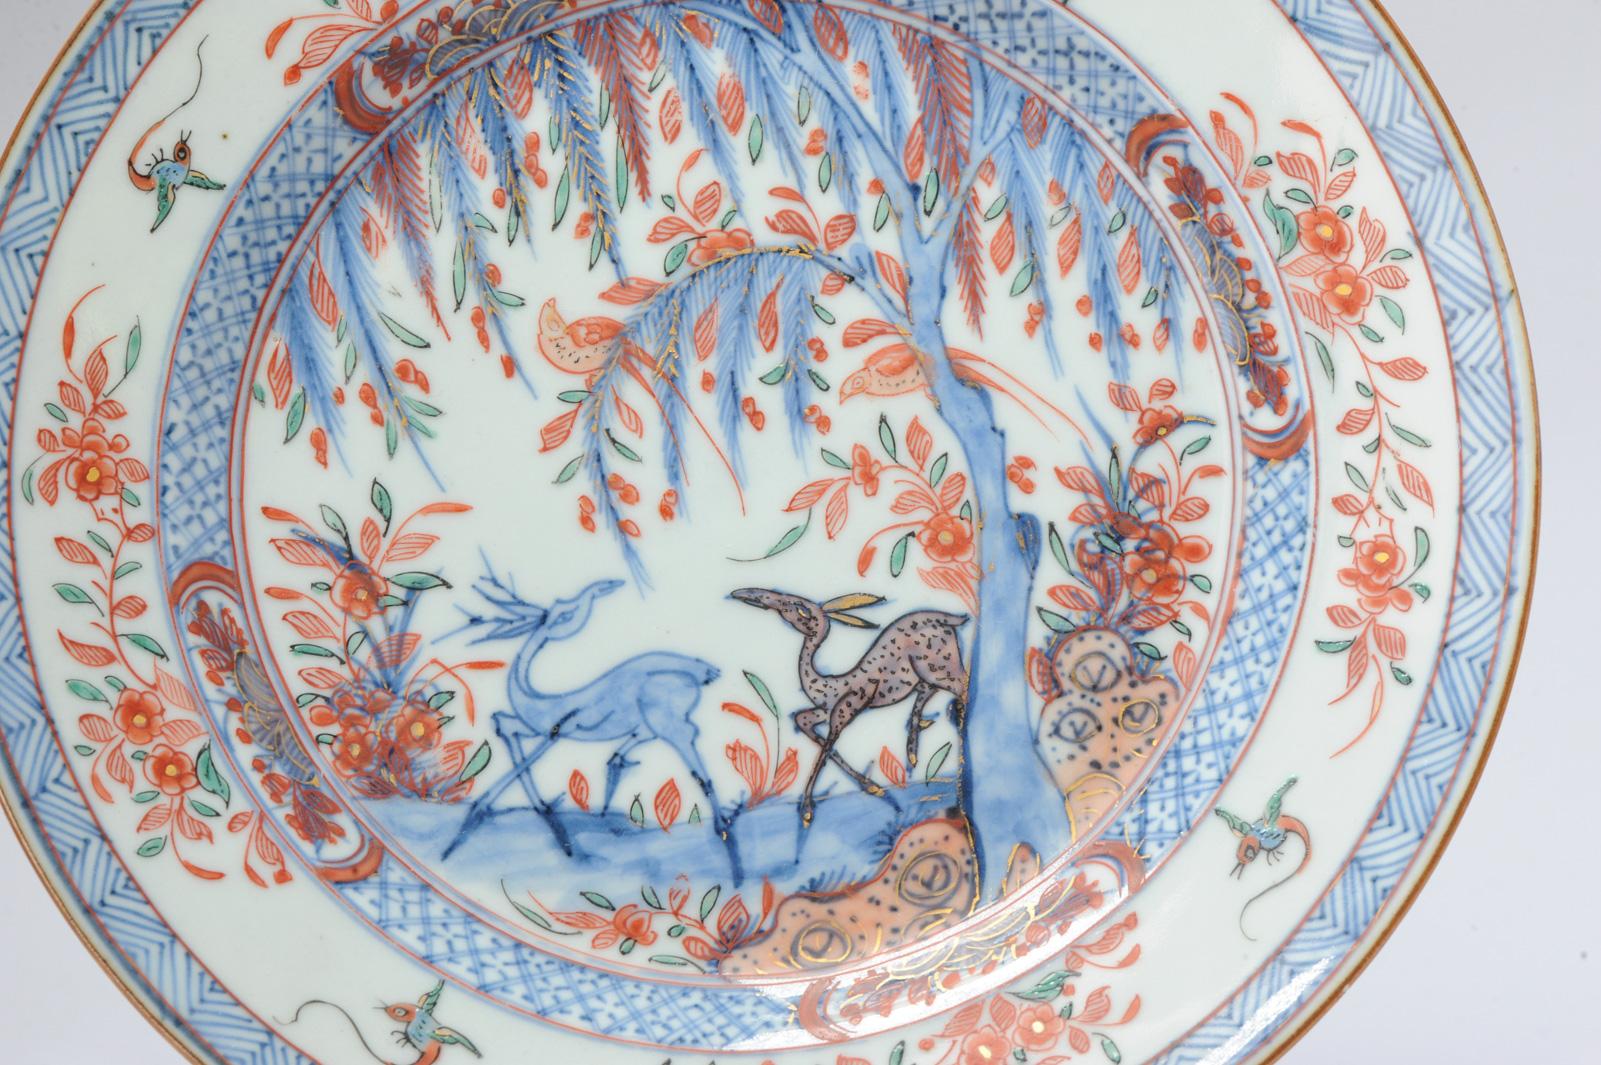 Antique Qianlong Bont Porcelain Deer Bird Chinese Plates, 18th Century In Good Condition For Sale In Amsterdam, Noord Holland